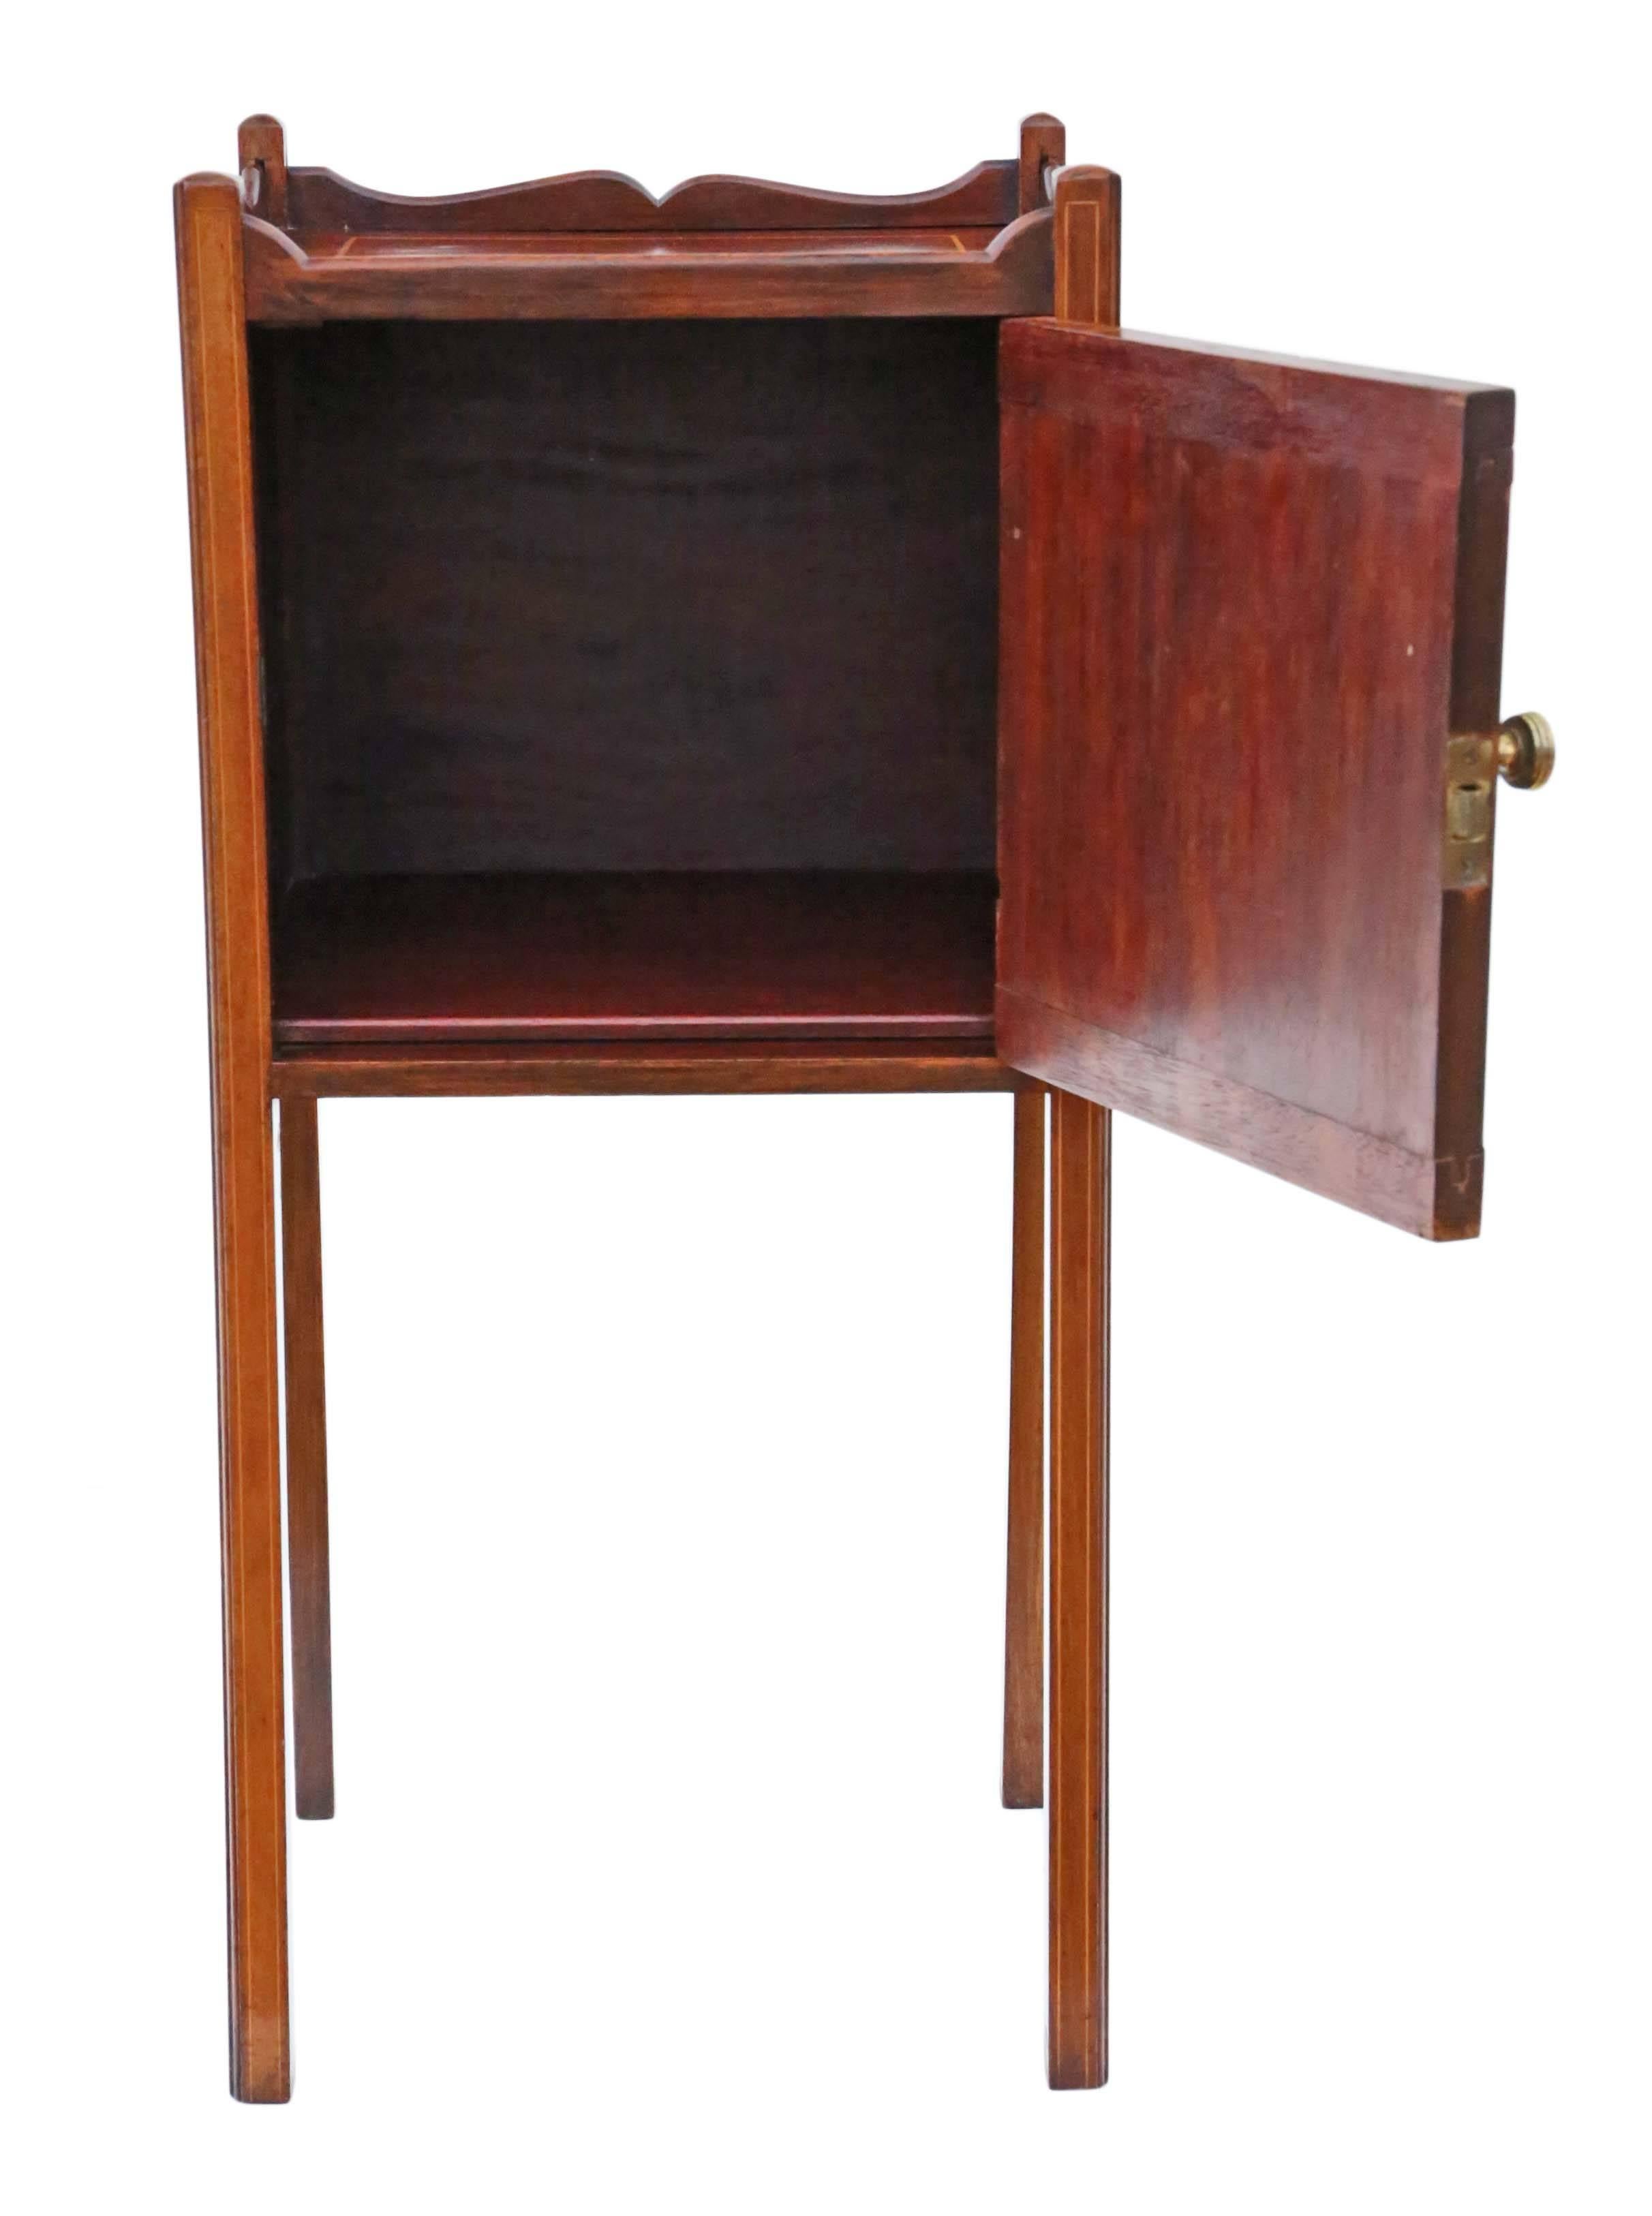 Early 20th Century Antique Georgian Revival, circa 1905 Mahogany Tray Top Bedside Table Cupboard For Sale